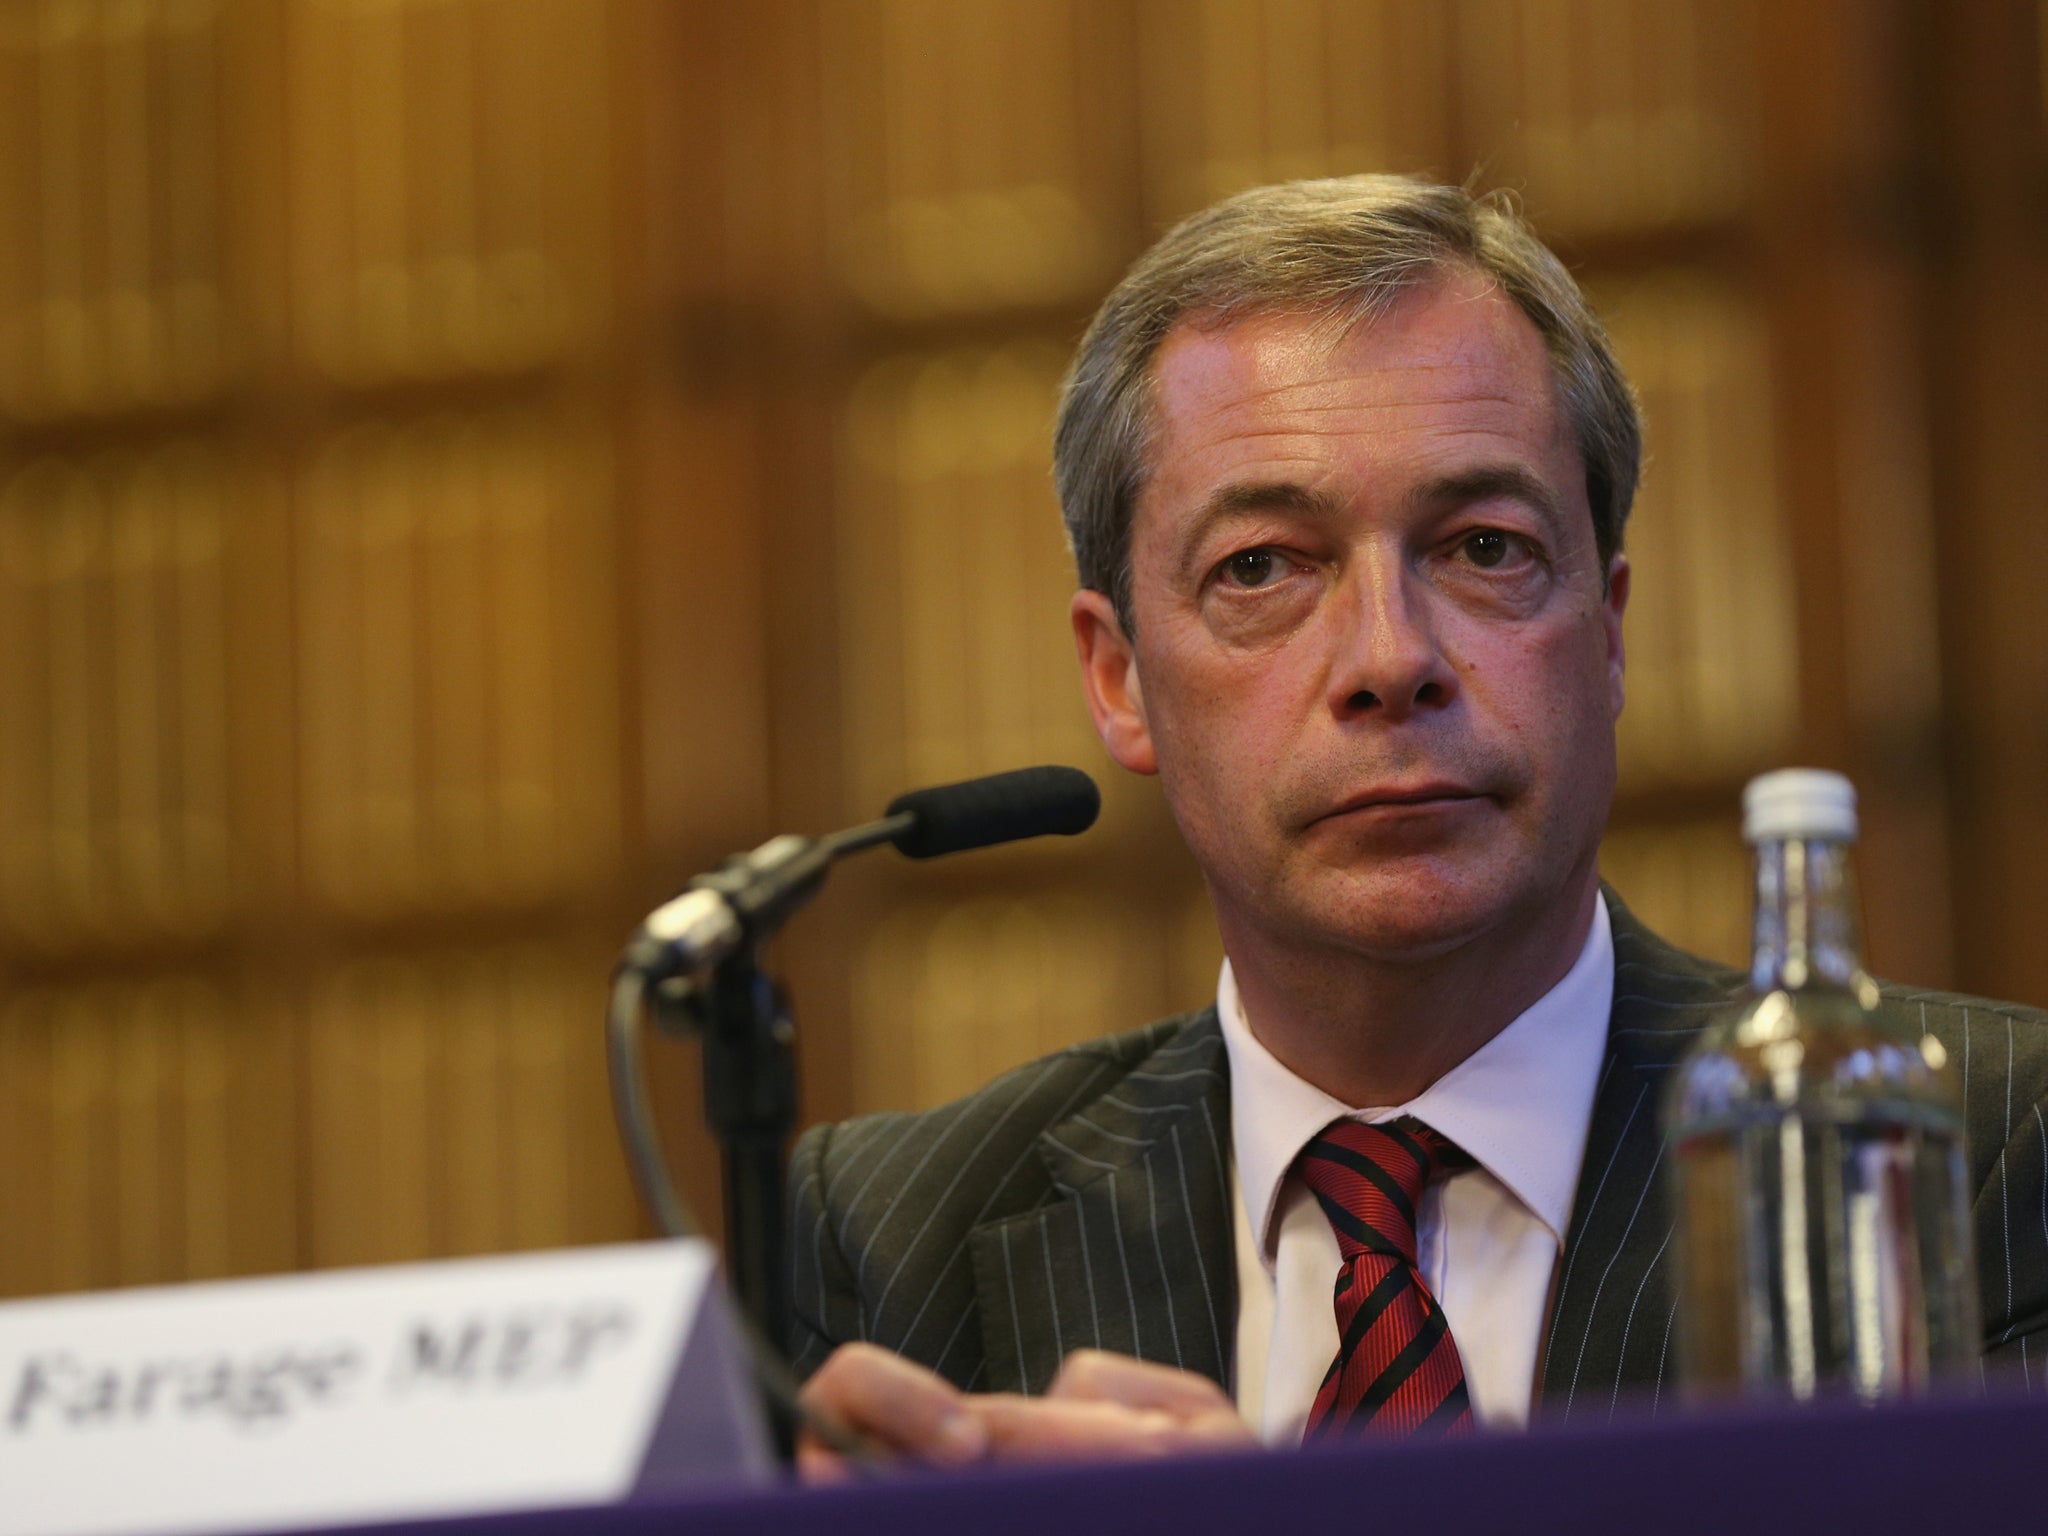 UKIP leader Nigel Farage has called on the Government to start allowing Syrian refugees into the country